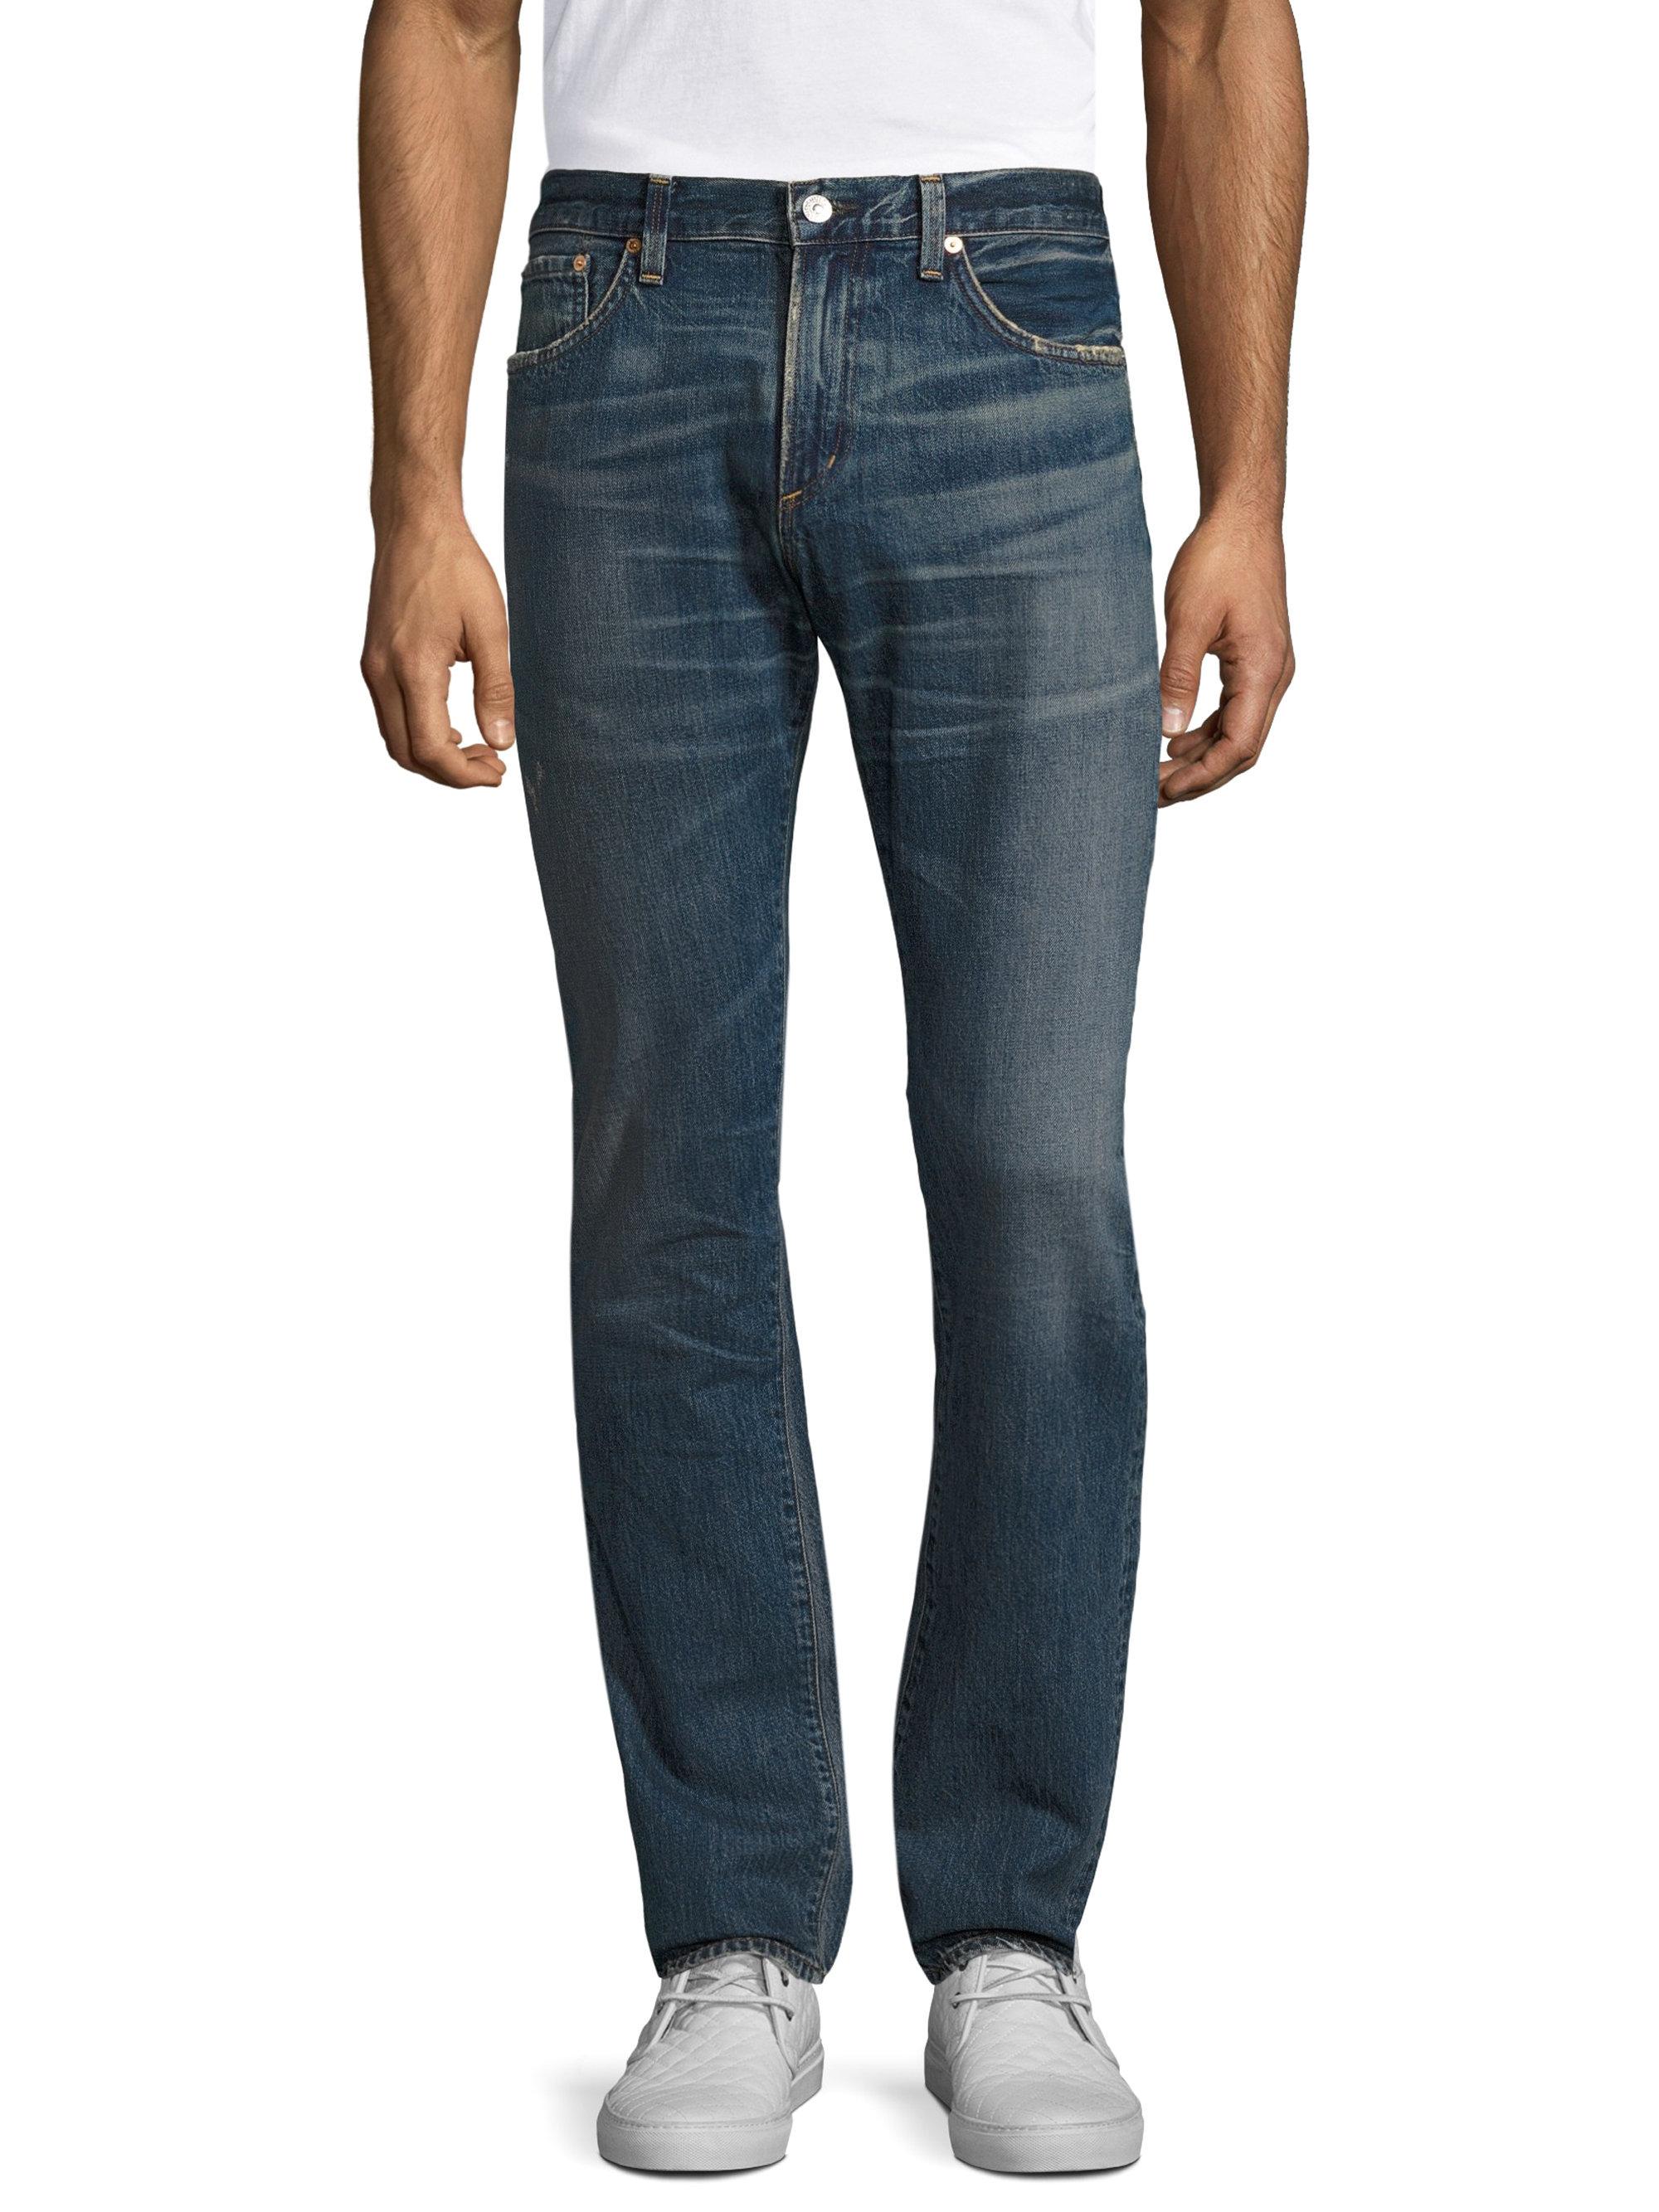 Lyst - Citizens Of Humanity Slim-fit Jeans in Blue for Men